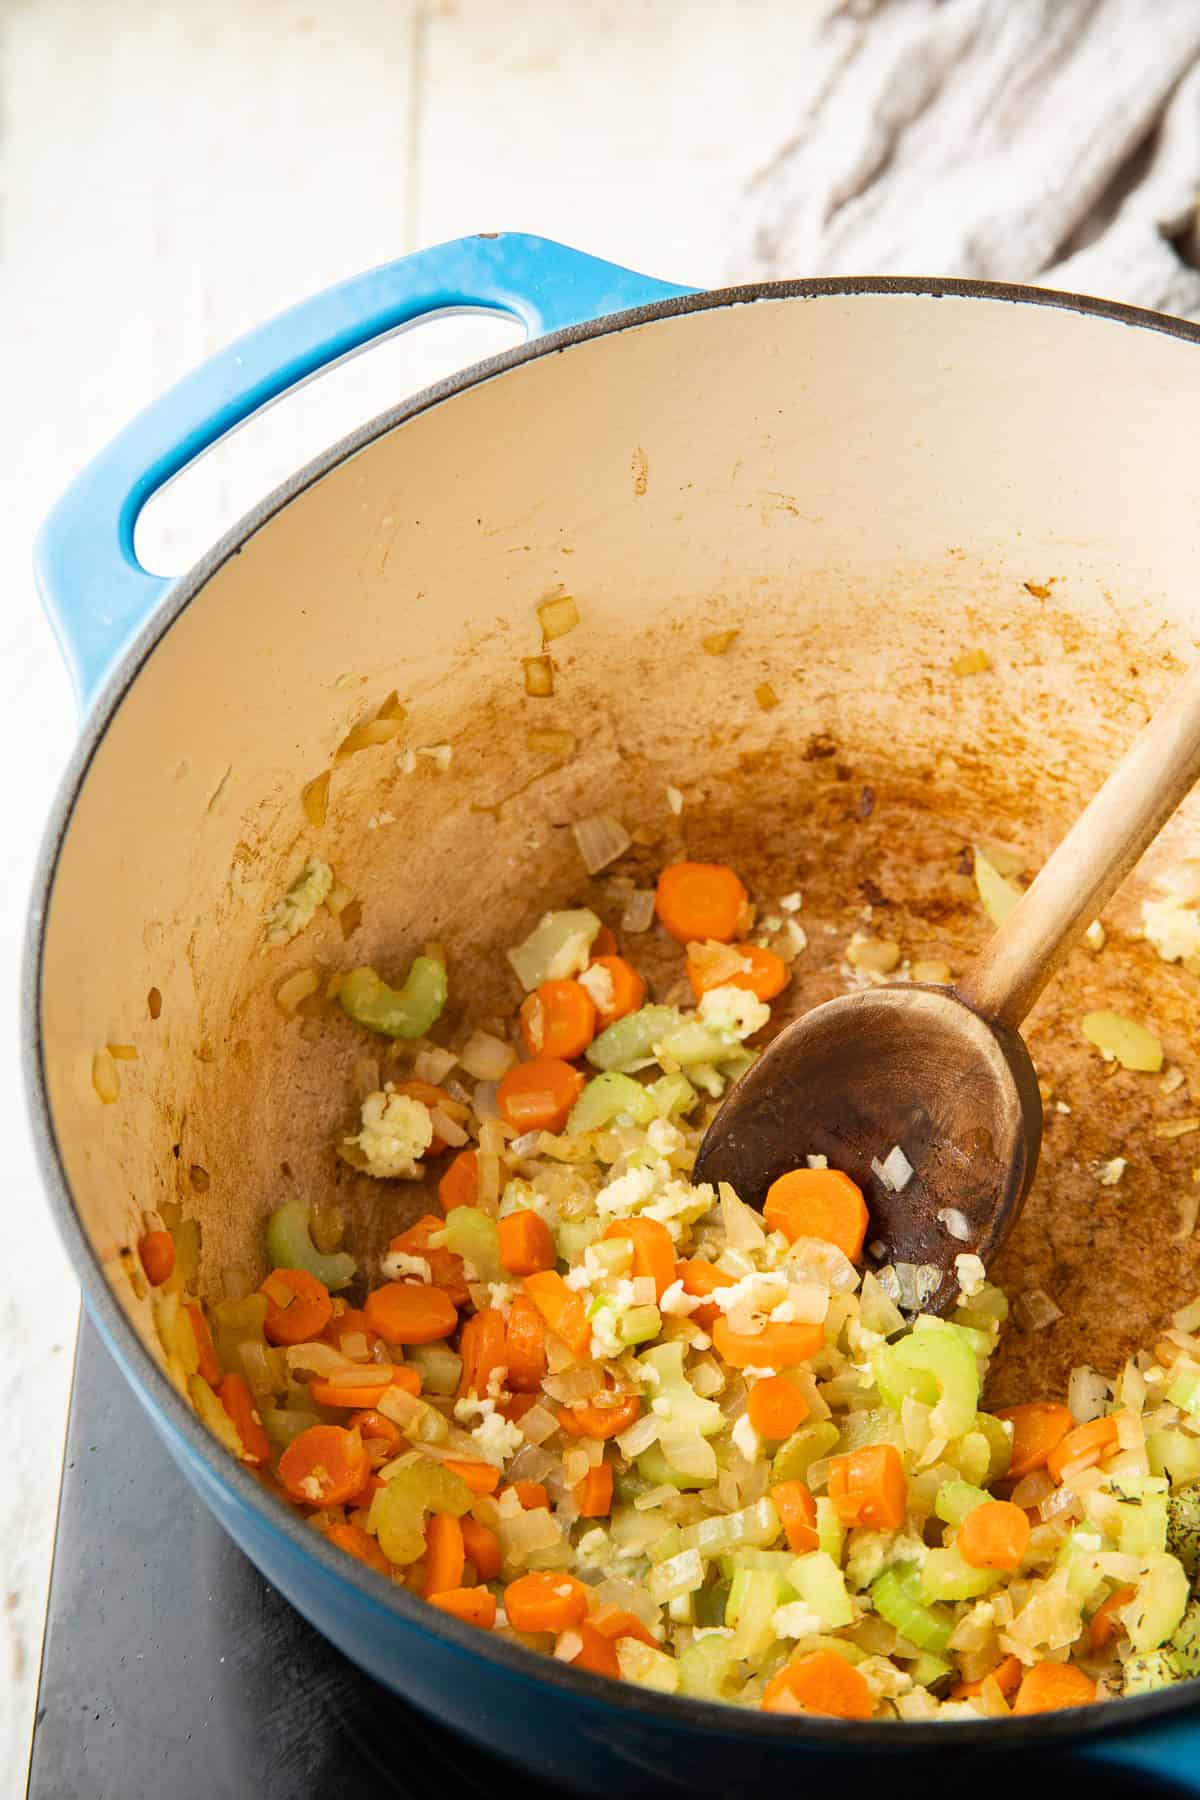 Cook onion, carrot, celery and garlic in a pot.